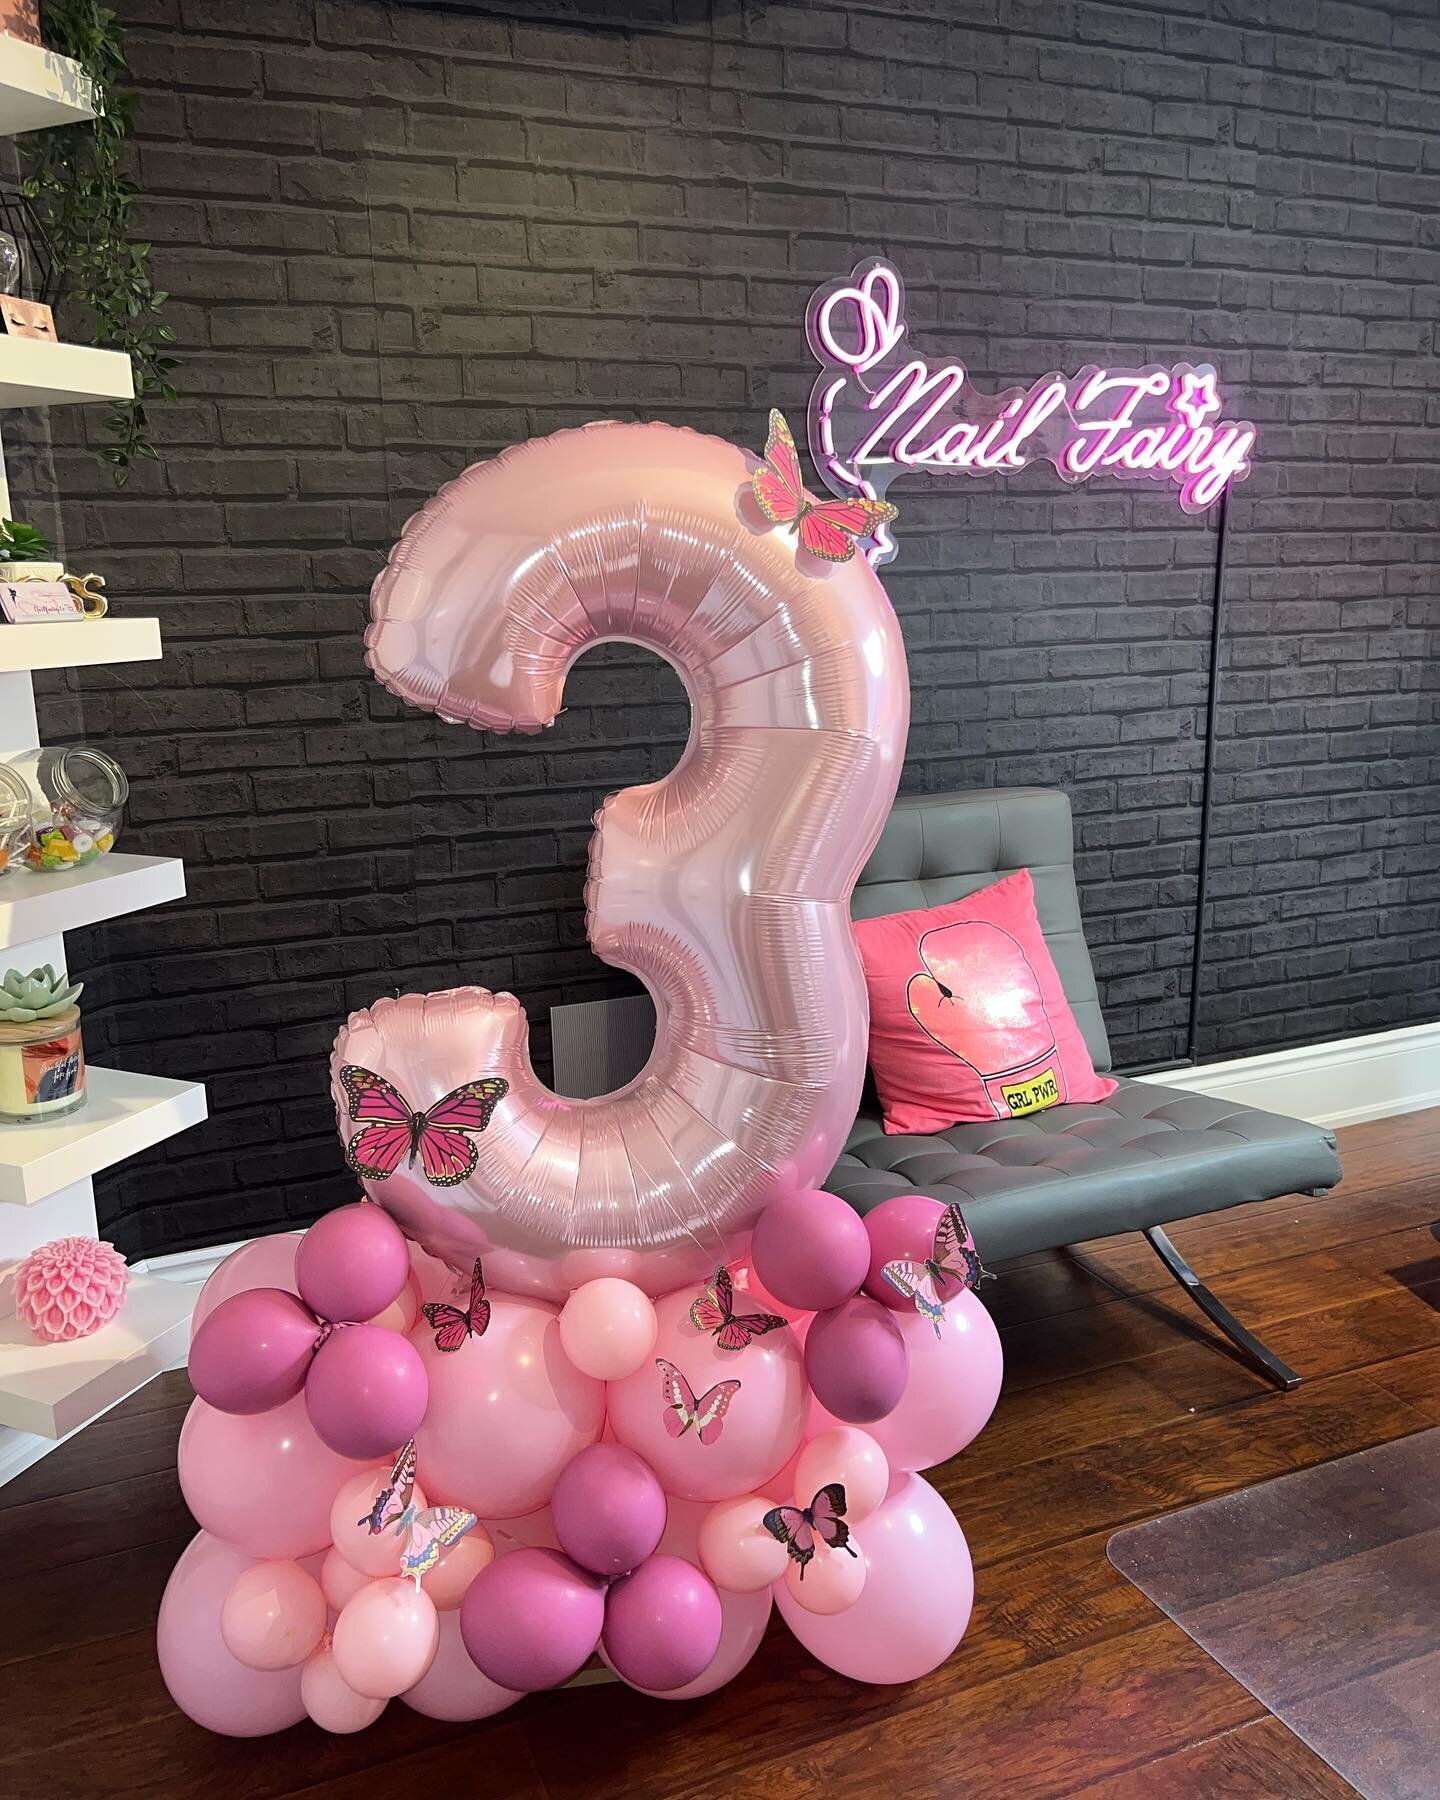 Congratulations to @nailfairy.to on 3 years in business 🦋🦋🦋🦋

#torontoballoons #bradfordballoons #poolparty #firstbirthday #balloongarland  #vaughanballoons #Wildonebirthday #missisaugaballoons #vaughanballoons #newmarketballoons  #ballooncentrep